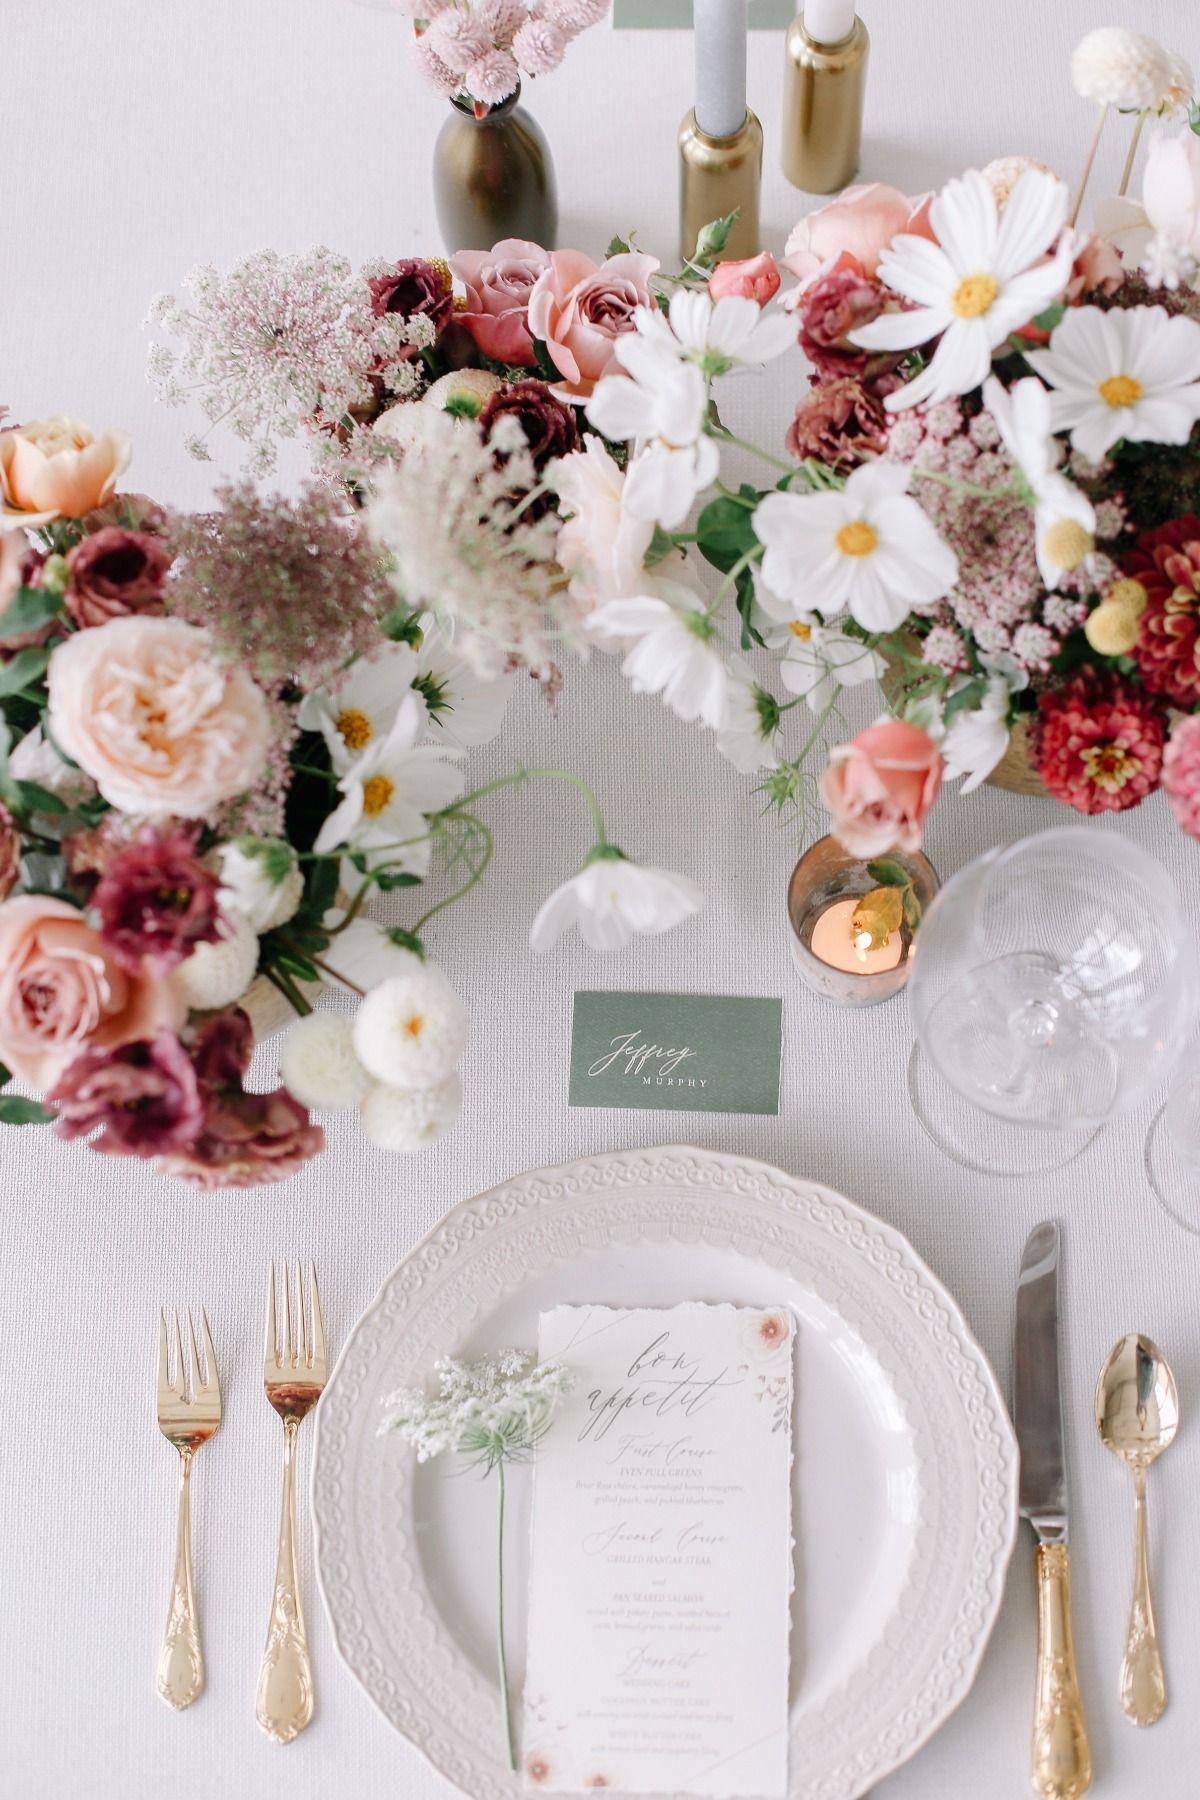 Adorable Sweetheart Table Decor Ideas That Inspire